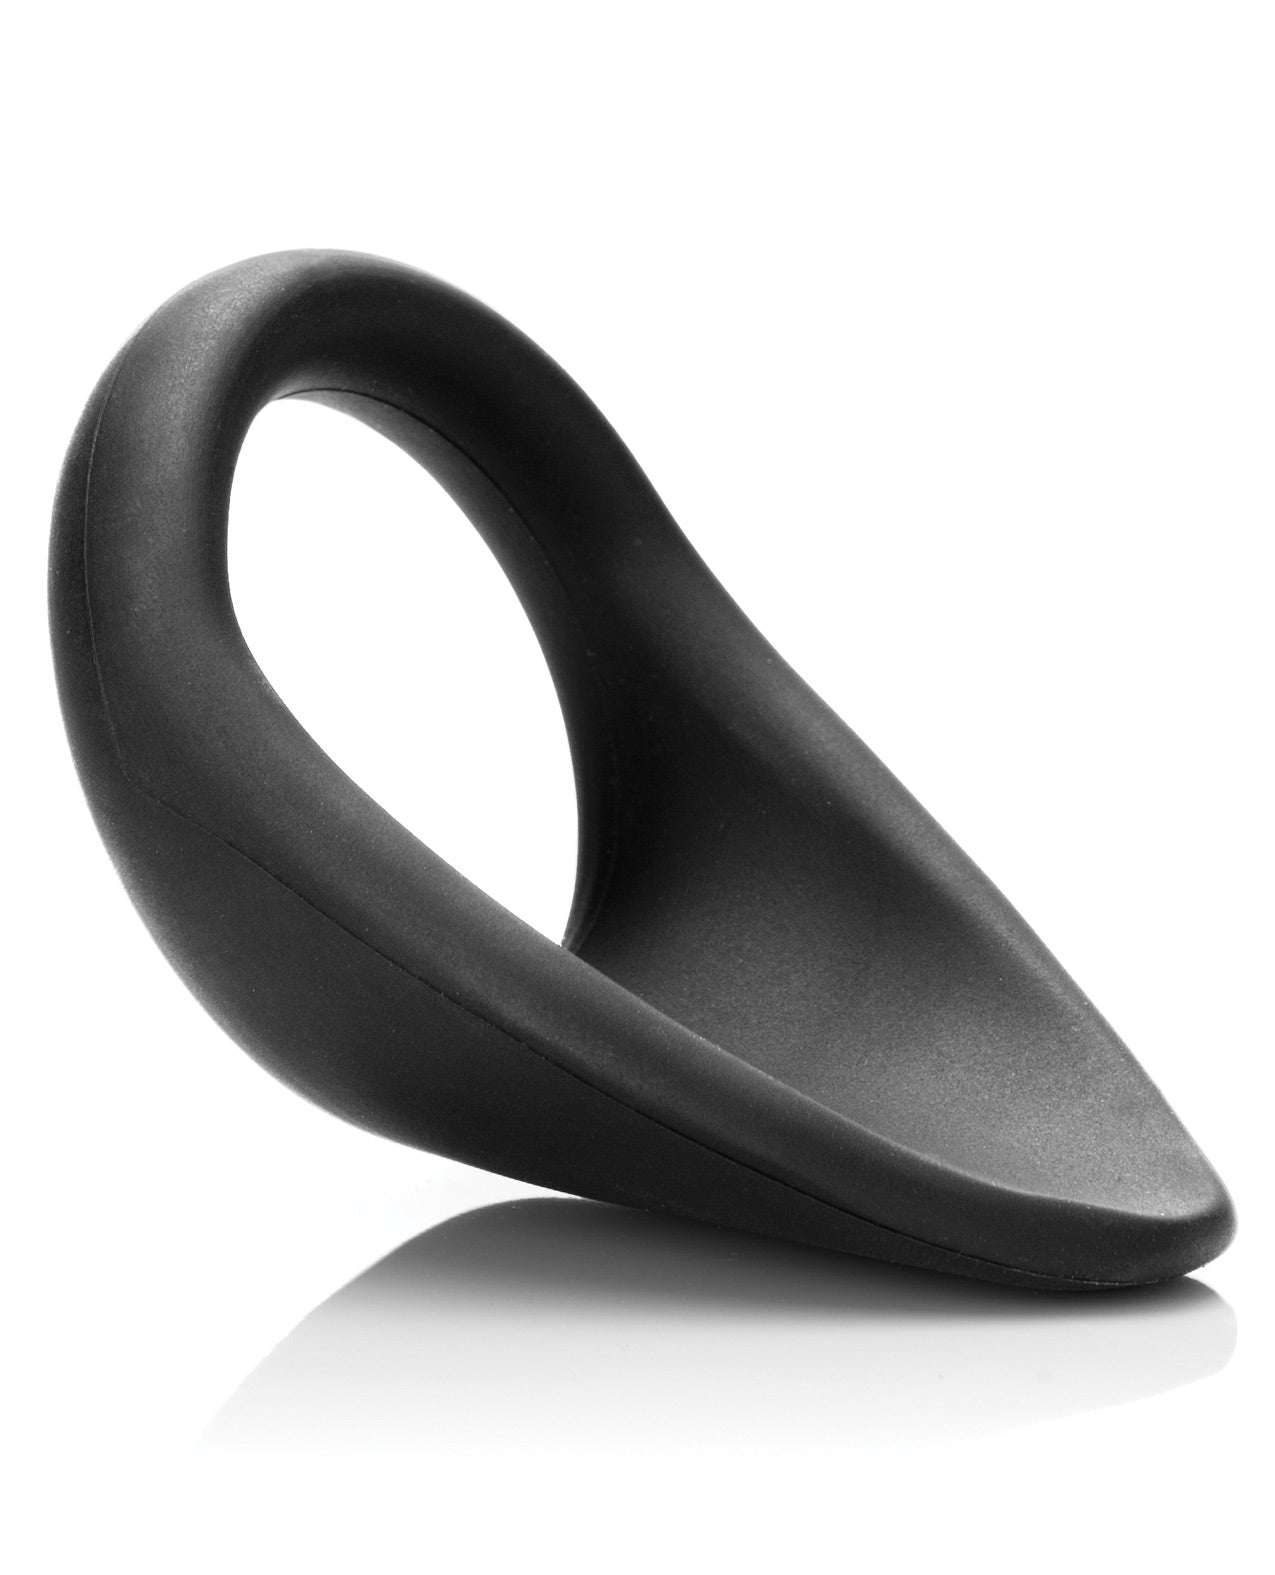 Tantus 1.75" Silicone Cock Sling - Onyx